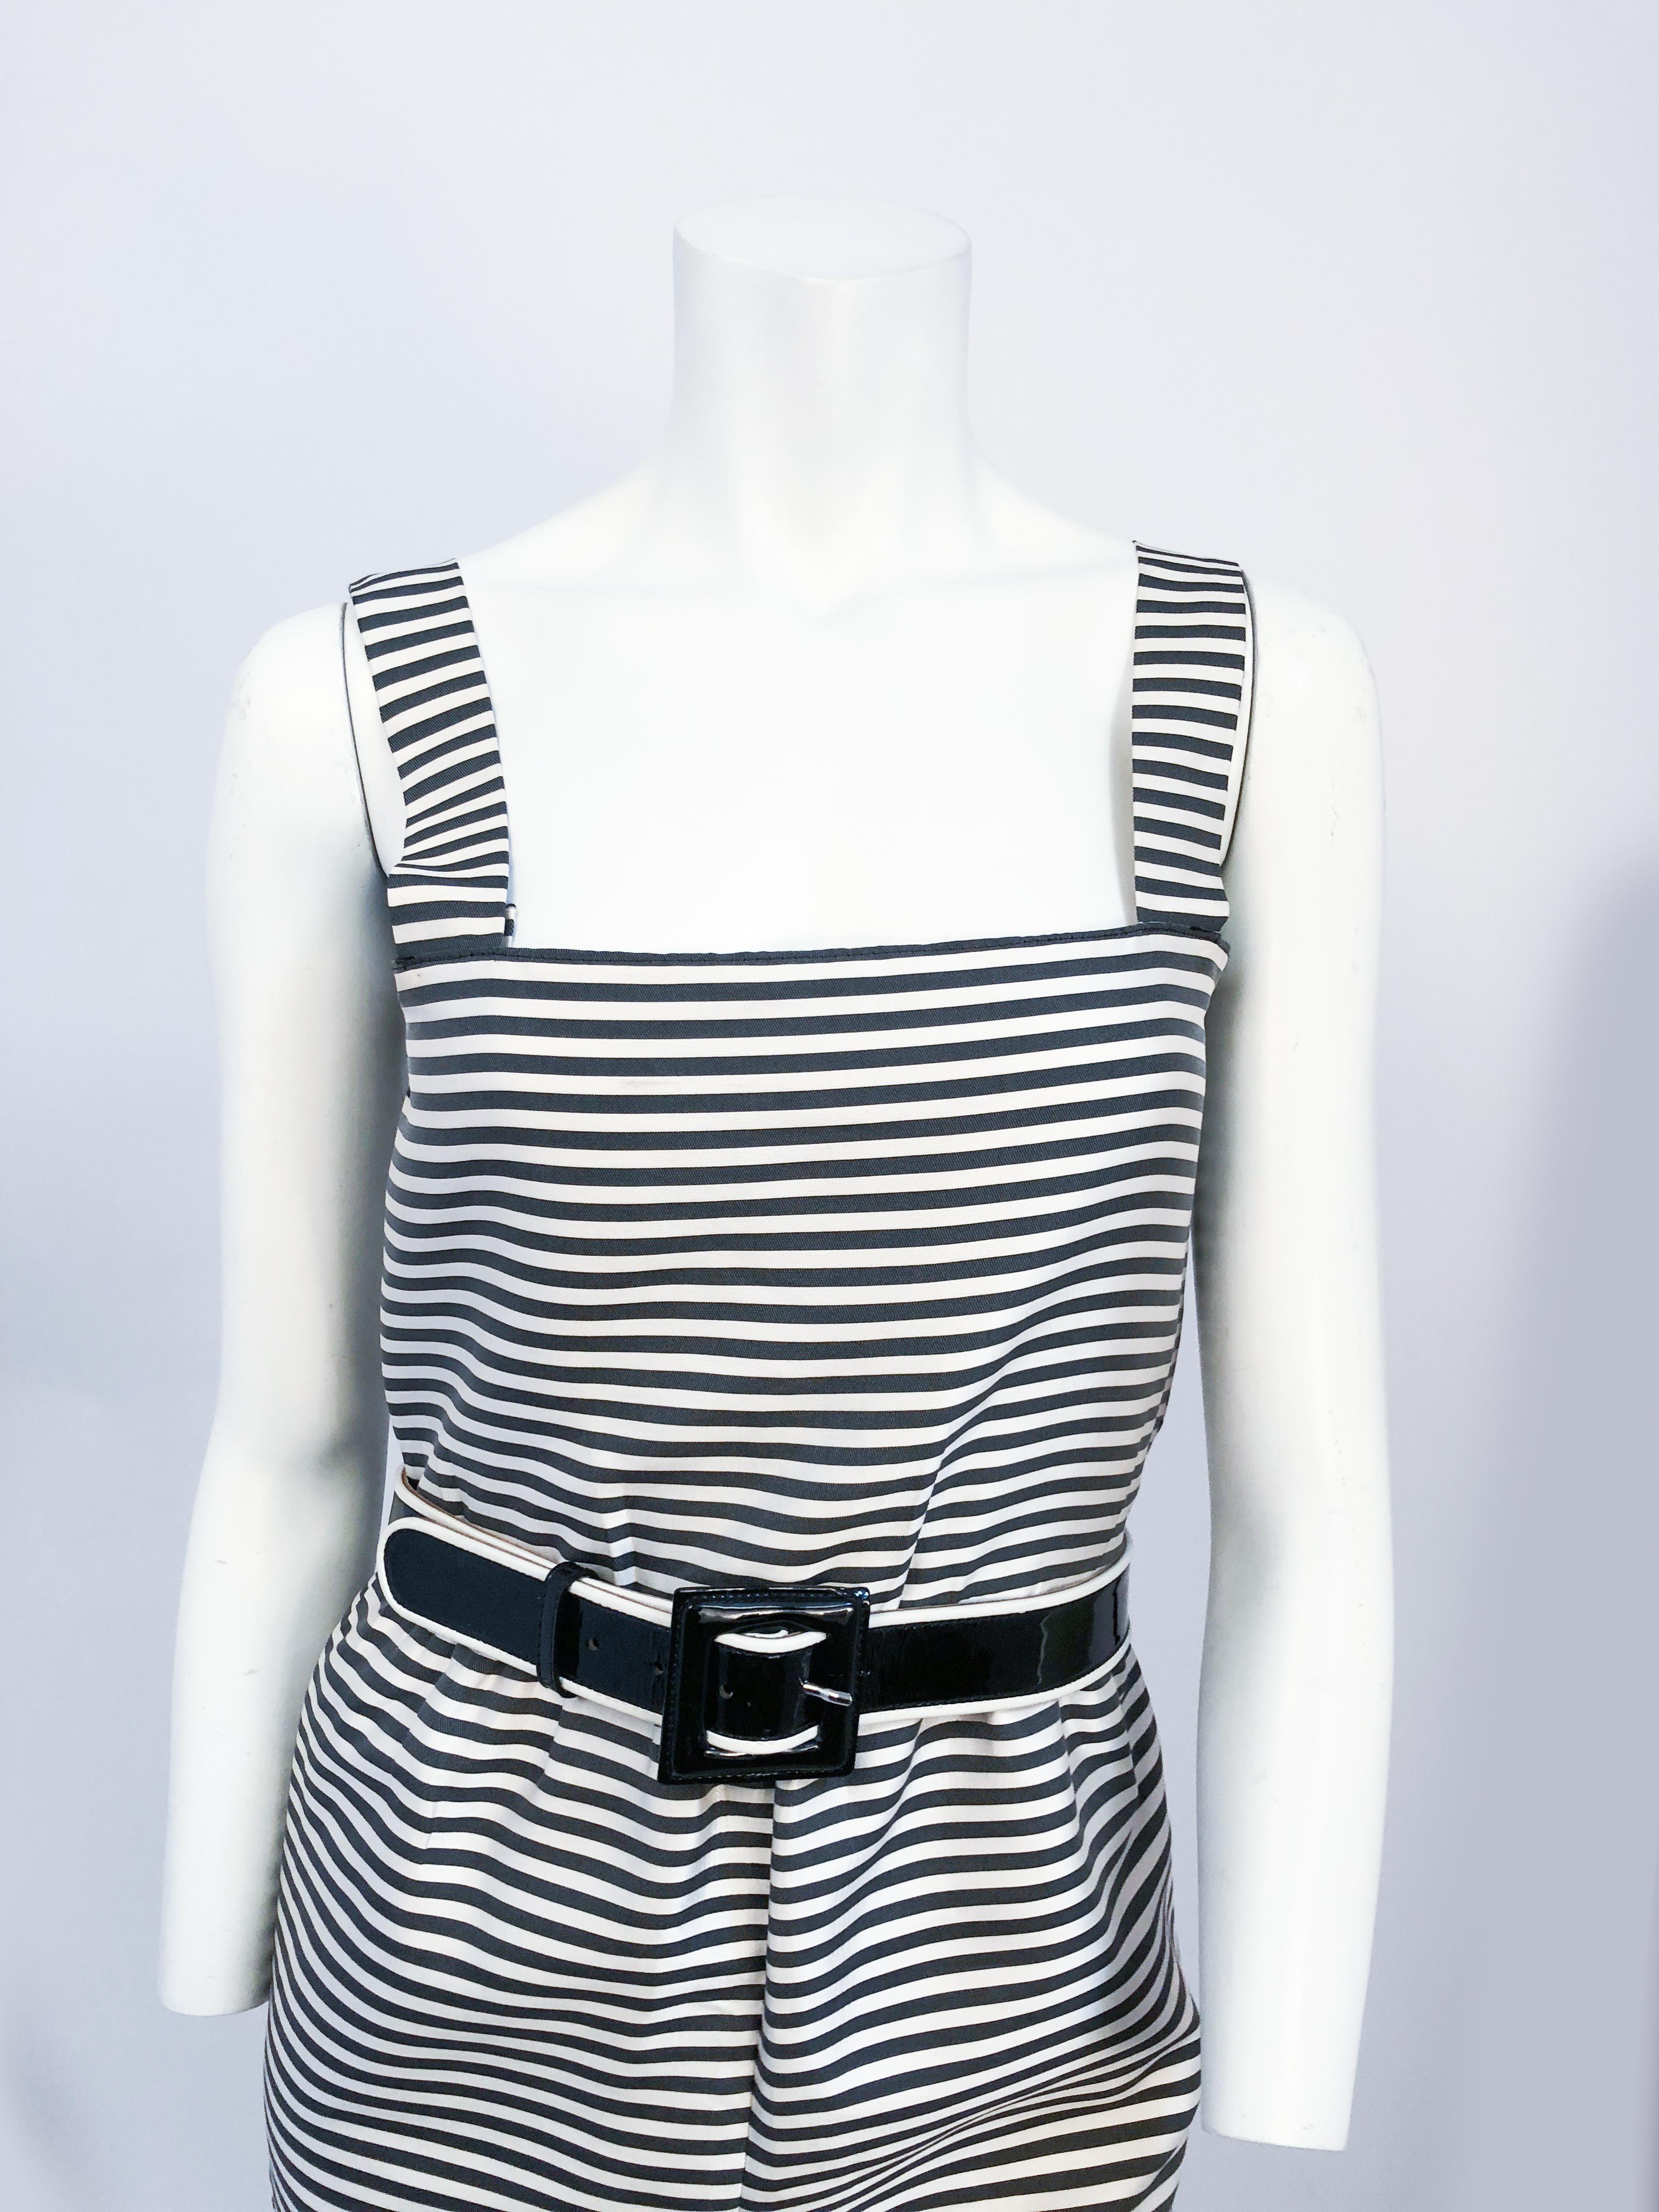 1990s Oscar De La Renta Silk Day Dress. silk striped day dress with enlarged patent leather covered buttons and matching belt.